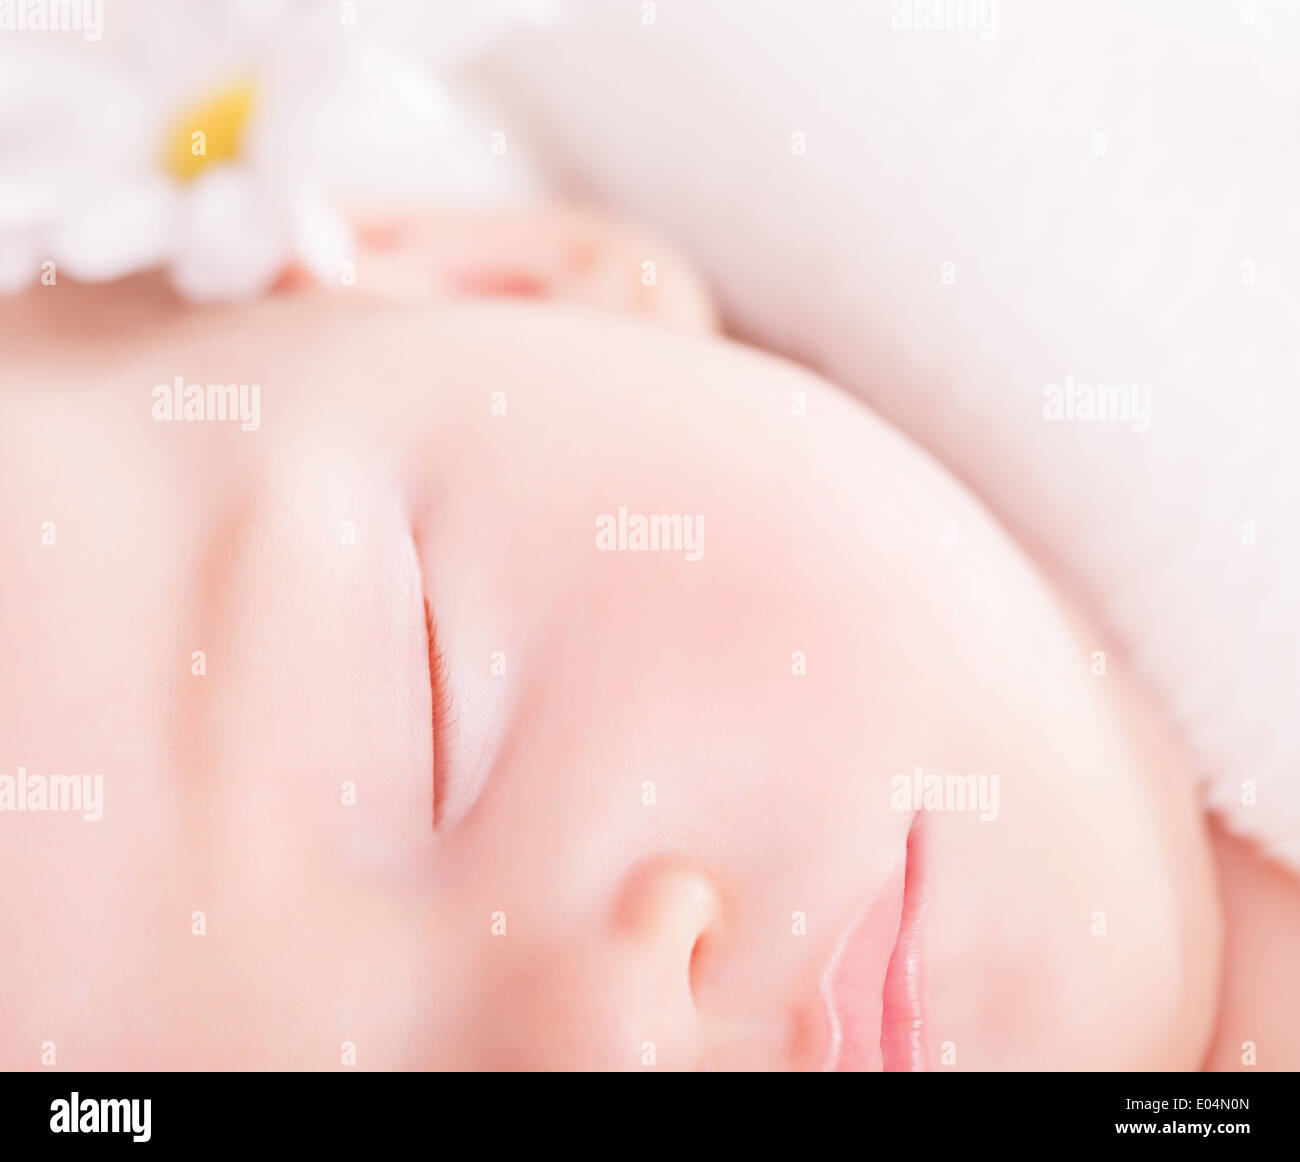 Closeup portrait of cute little baby sleep, face part, gentle daisy flower decoration, carefree childhood, purity and innocence Stock Photo